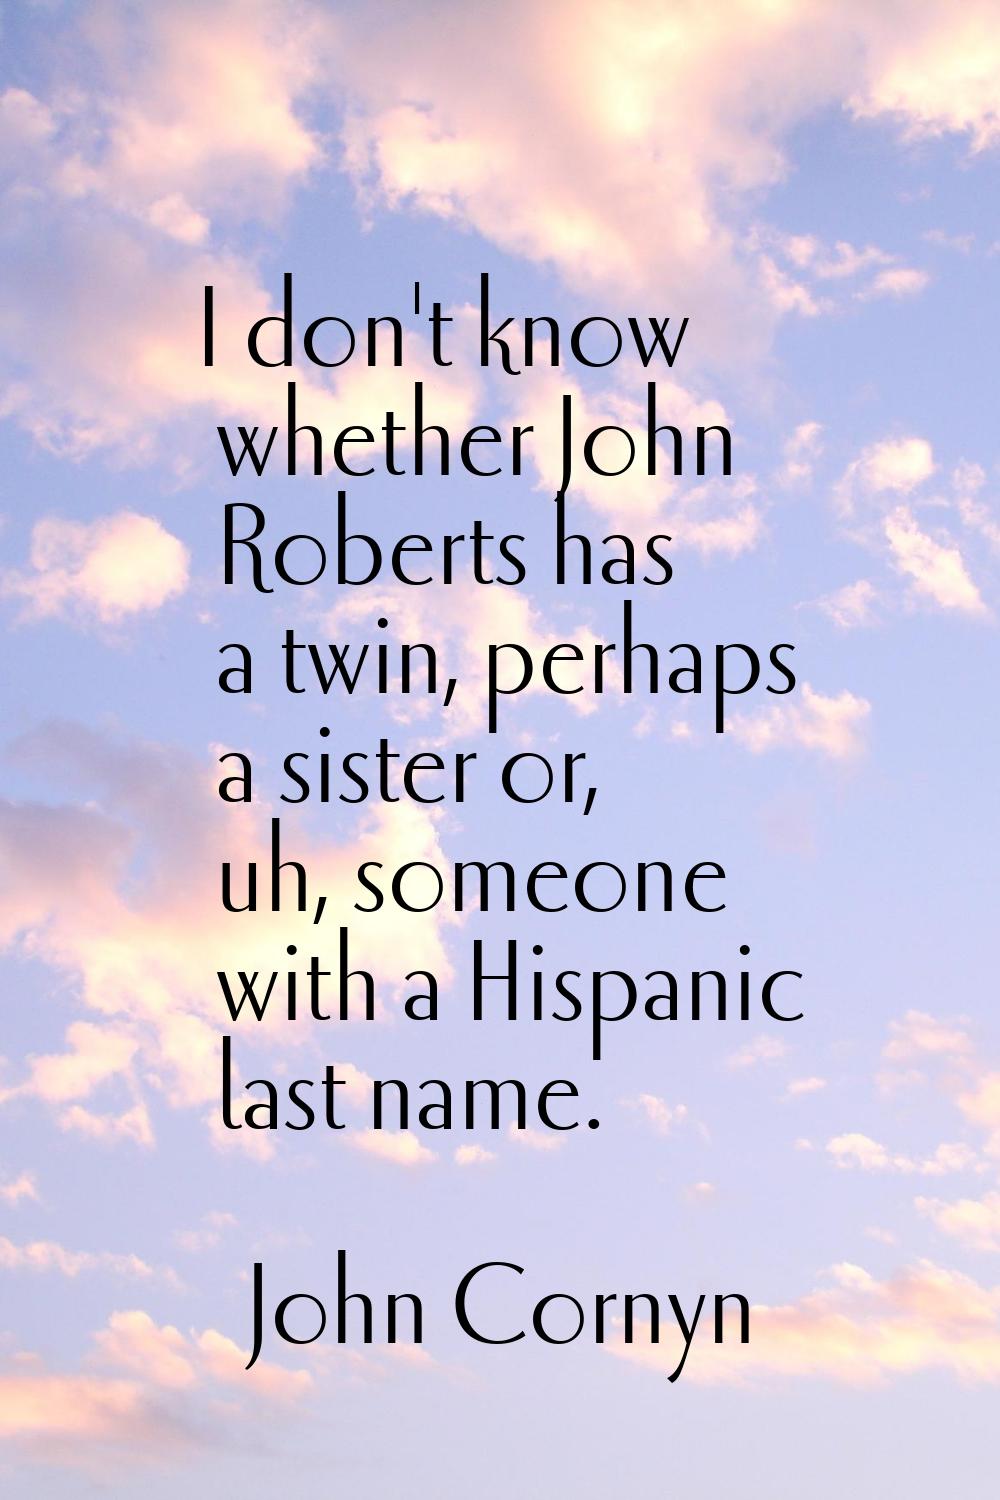 I don't know whether John Roberts has a twin, perhaps a sister or, uh, someone with a Hispanic last